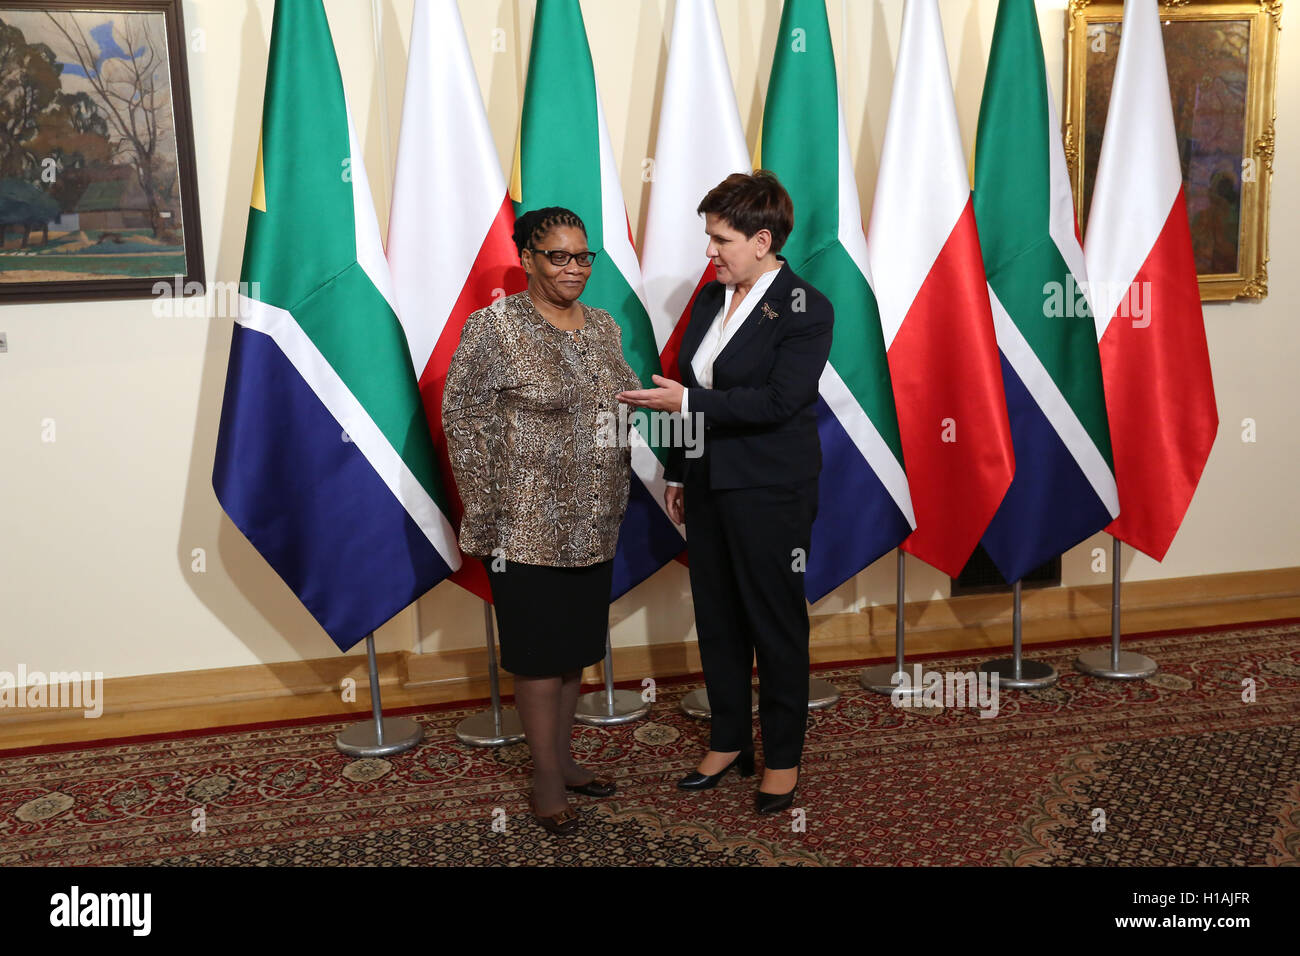 Warsaw, Poland. 23rd September, 2016. Prime Minister Beata Szydlo receimved Chairperson of the National Council of Provinces of South Africa (NCOP) Thandi Modise for official visit in Warsaw. Credit:  Jake Ratz/Alamy Live News Stock Photo